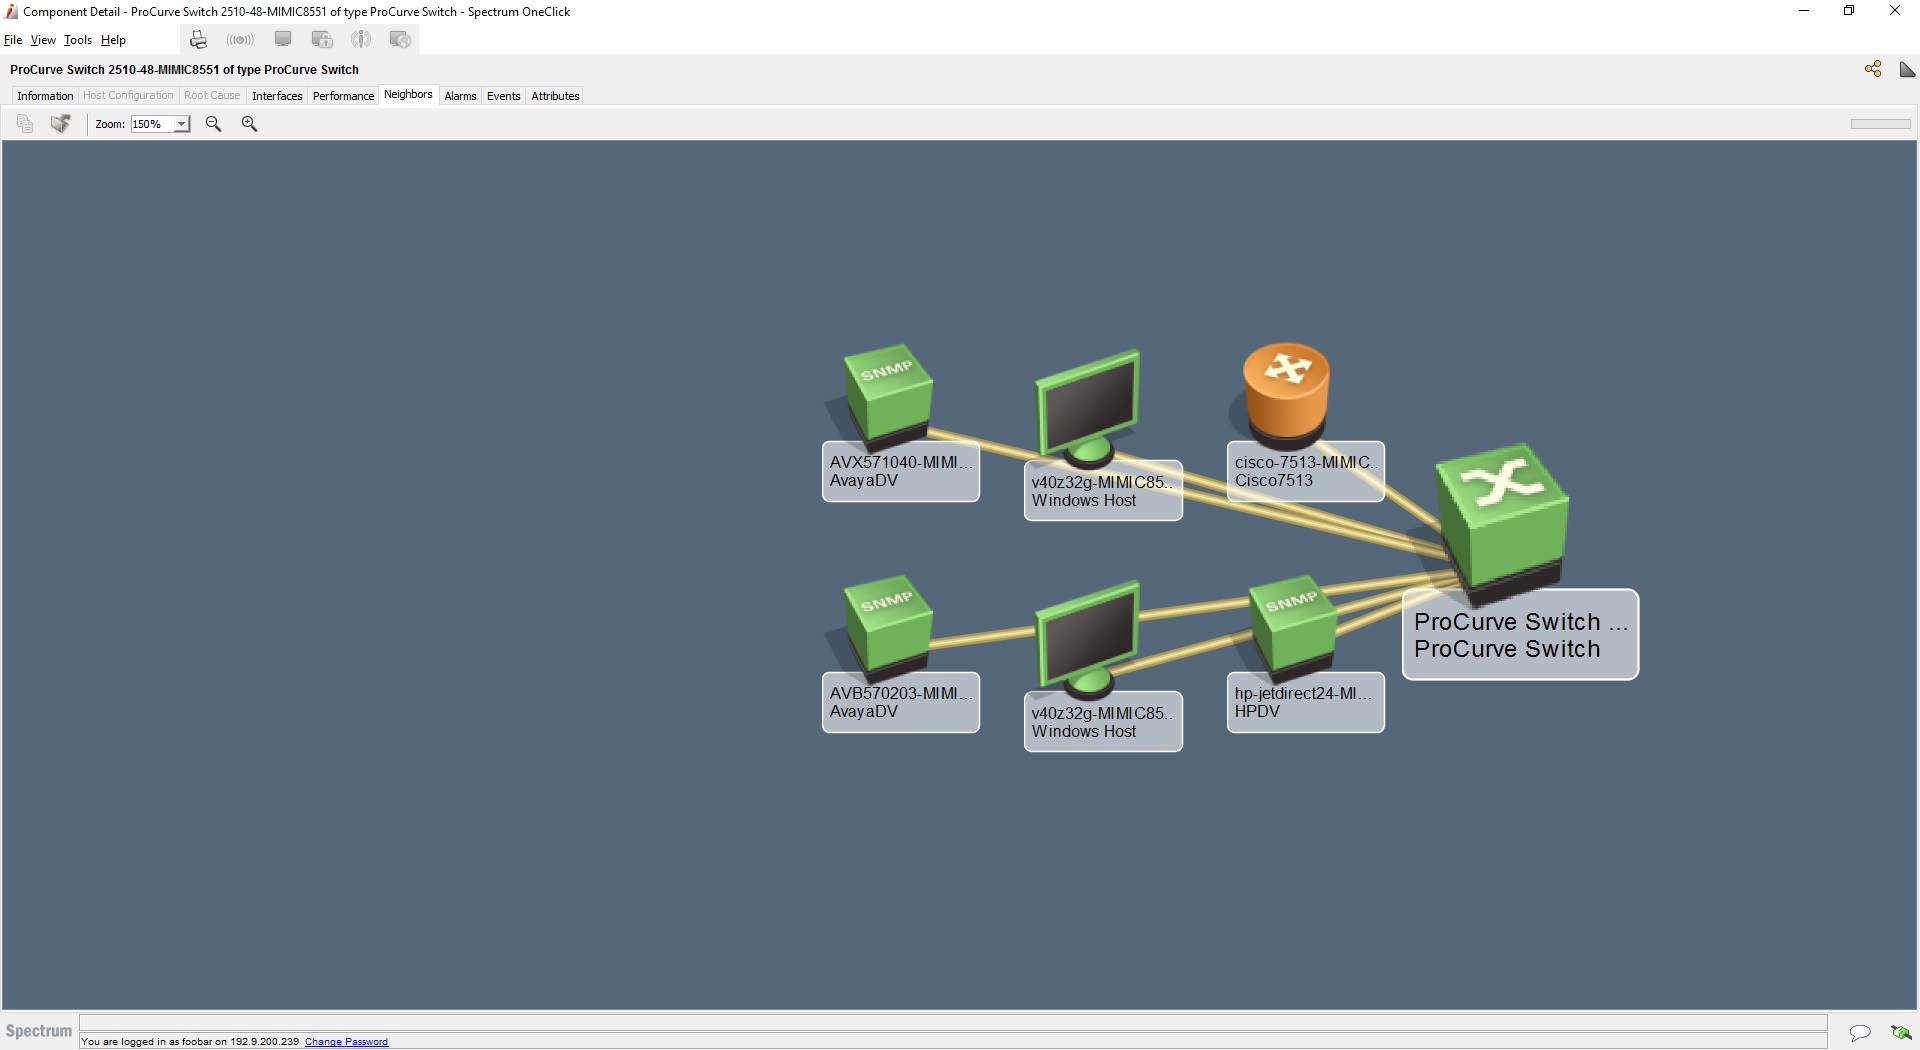 SNMP Simulator with the starting network